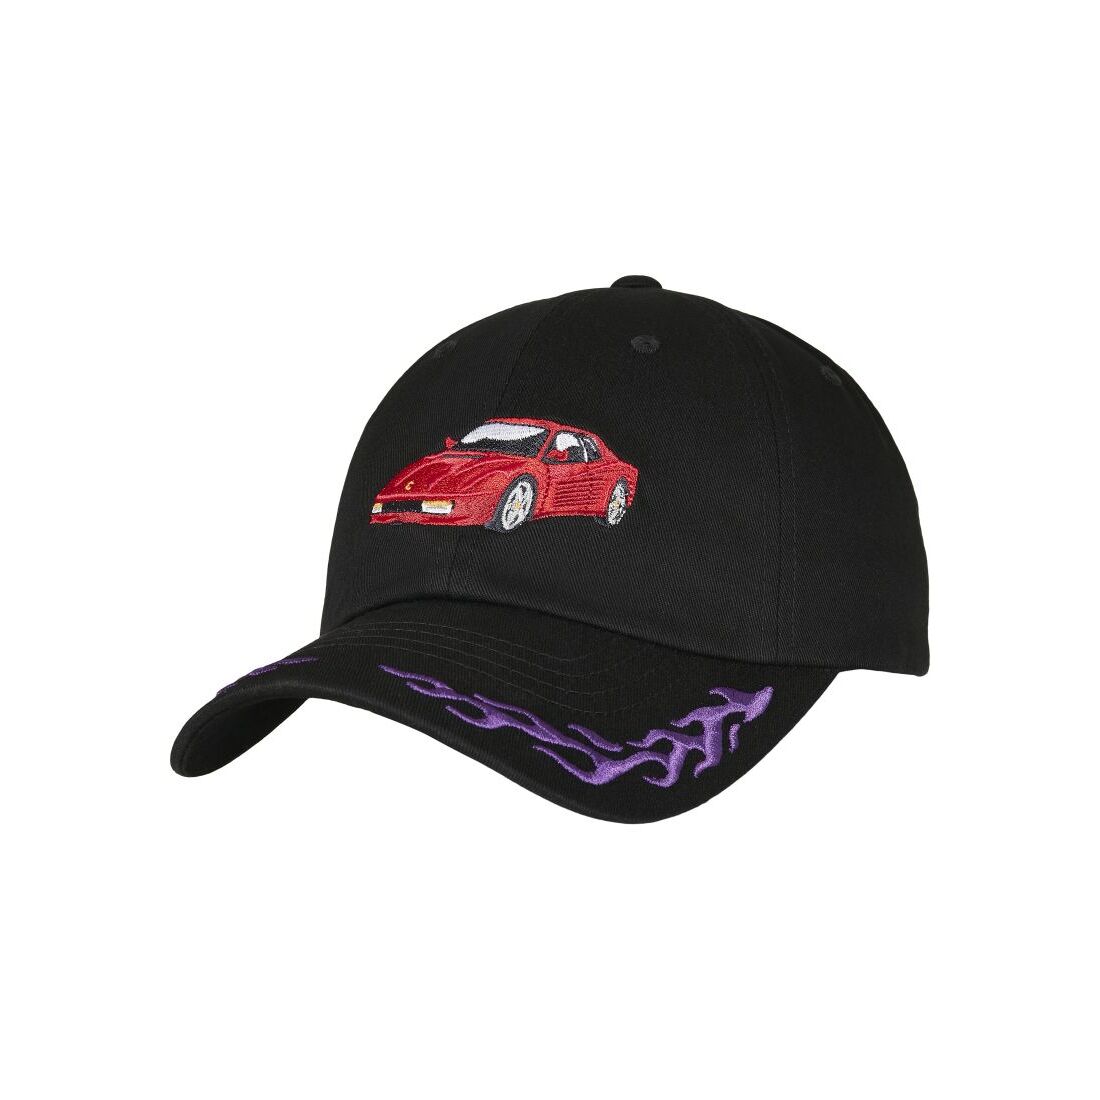 casquette courbée cayler & sons wl ride or fly